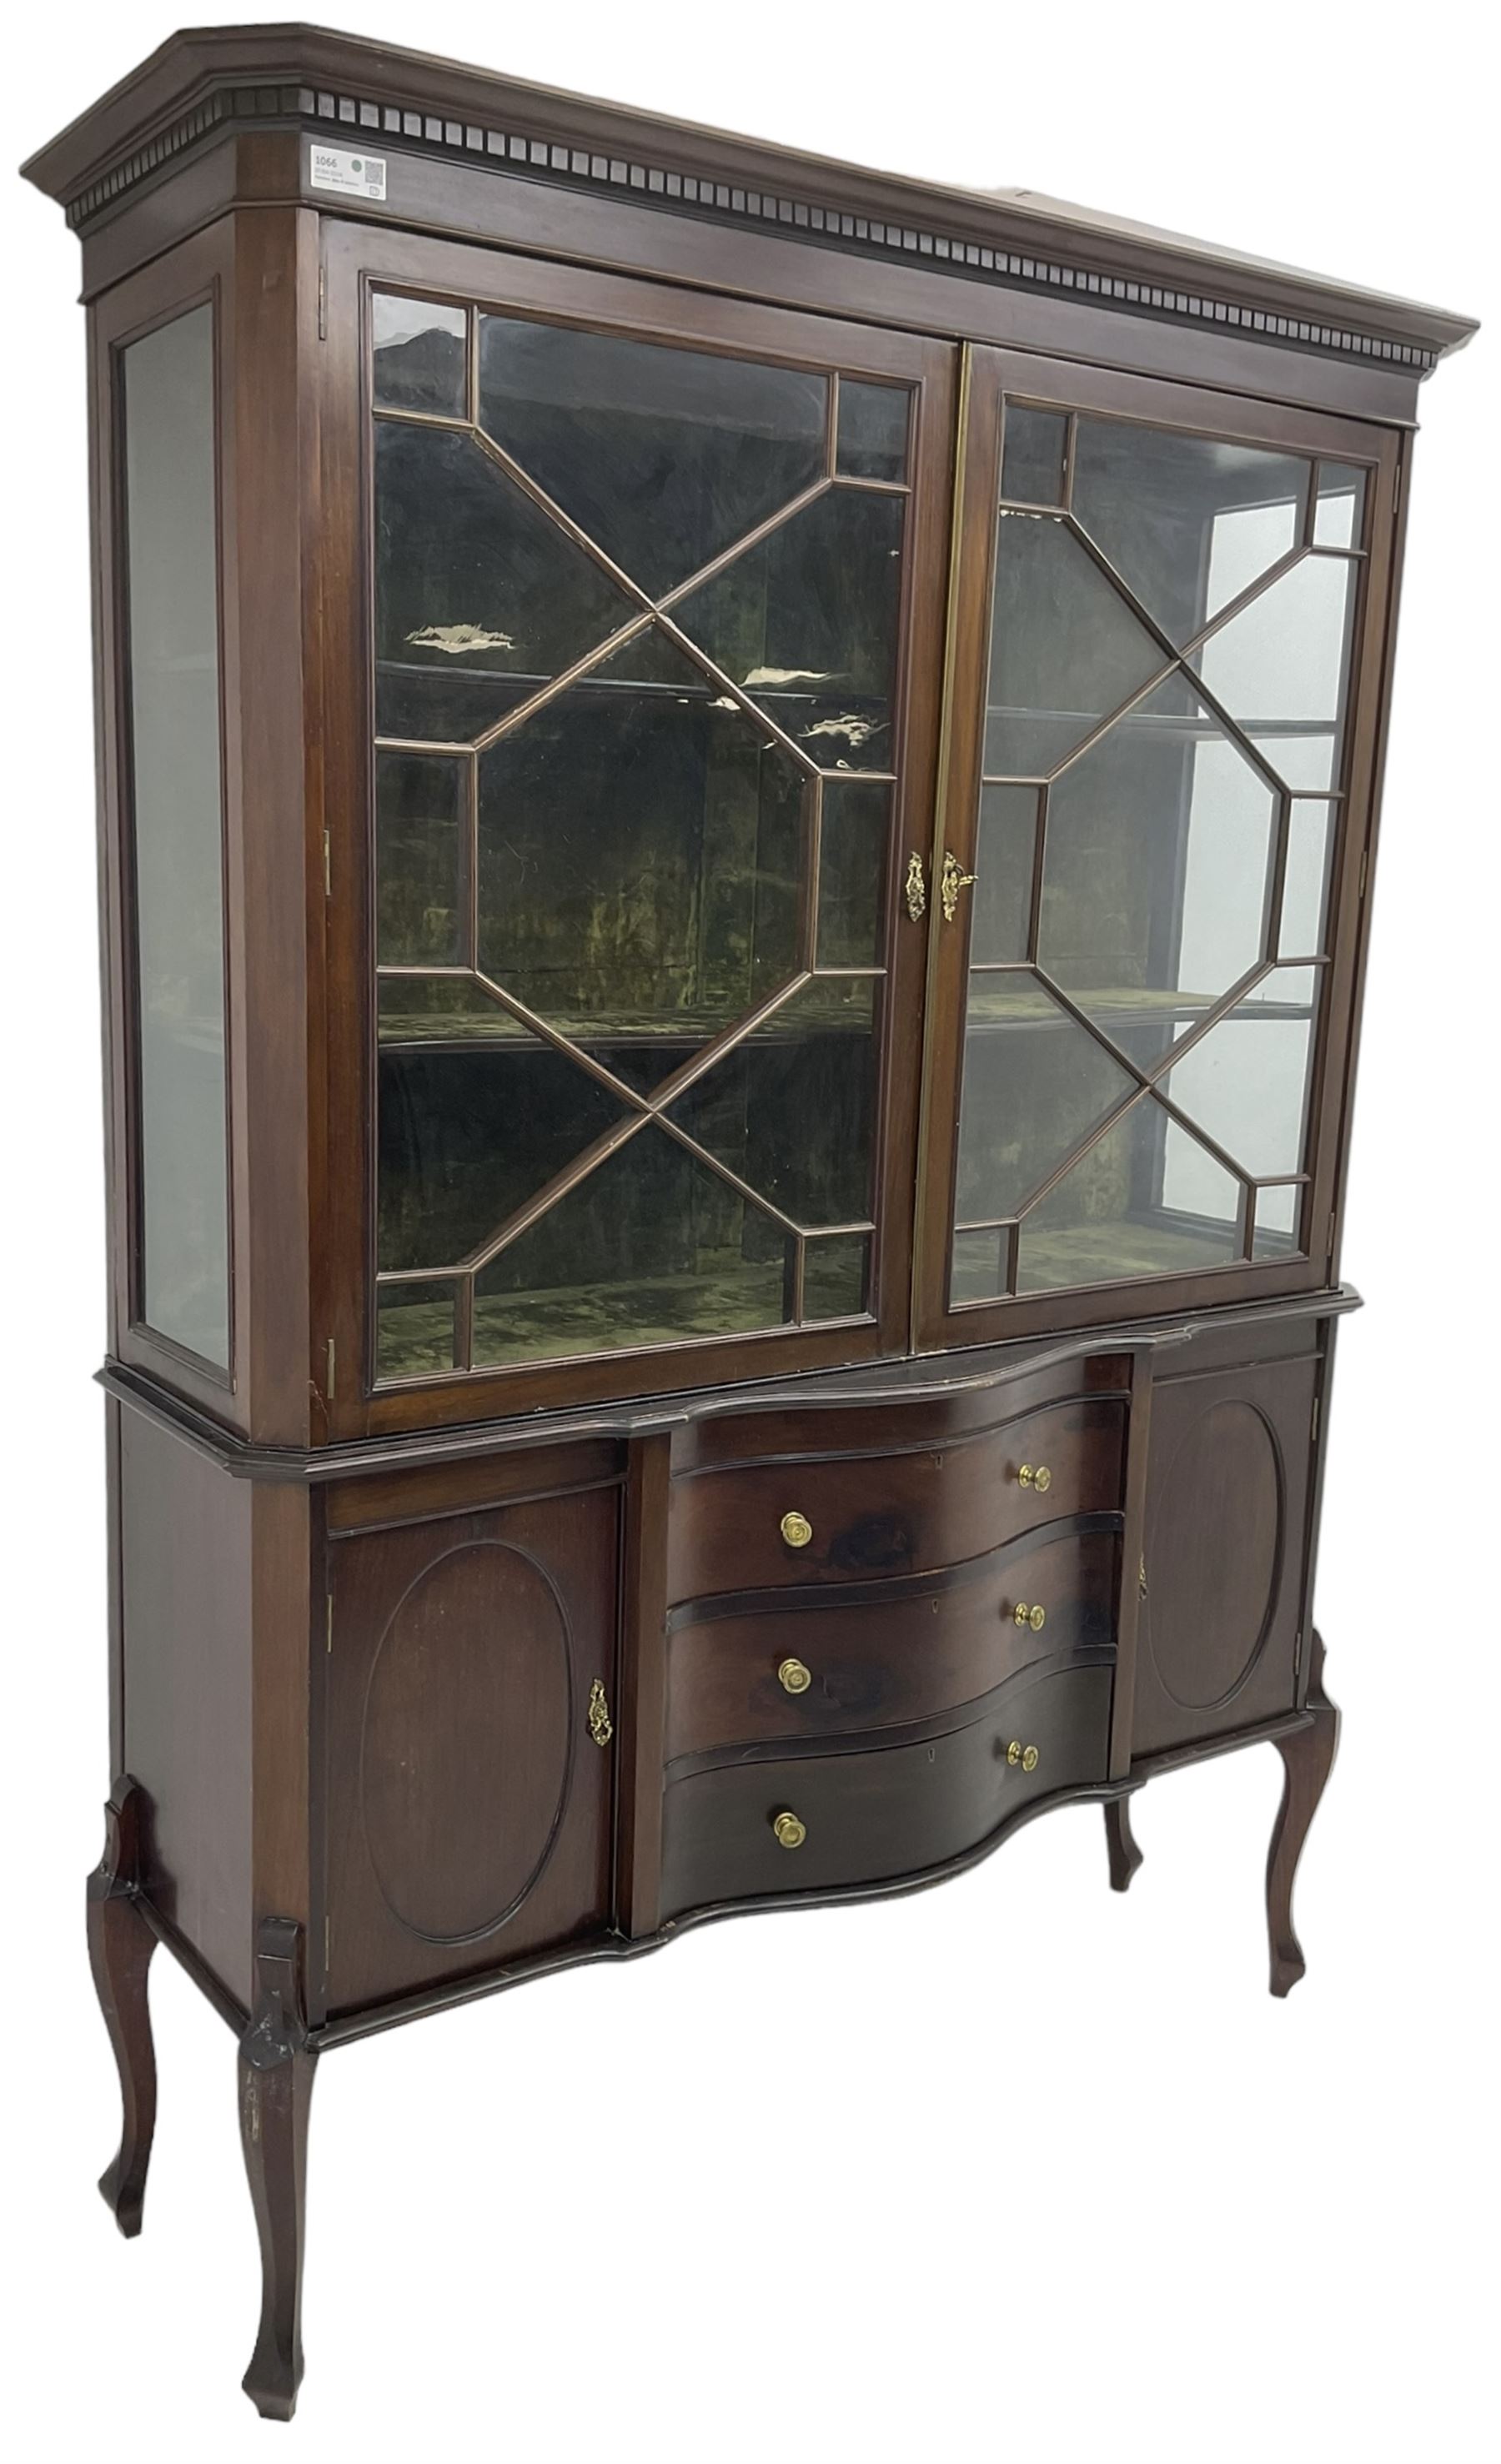 Late 19th century mahogany display cabinet on stand - Image 6 of 7